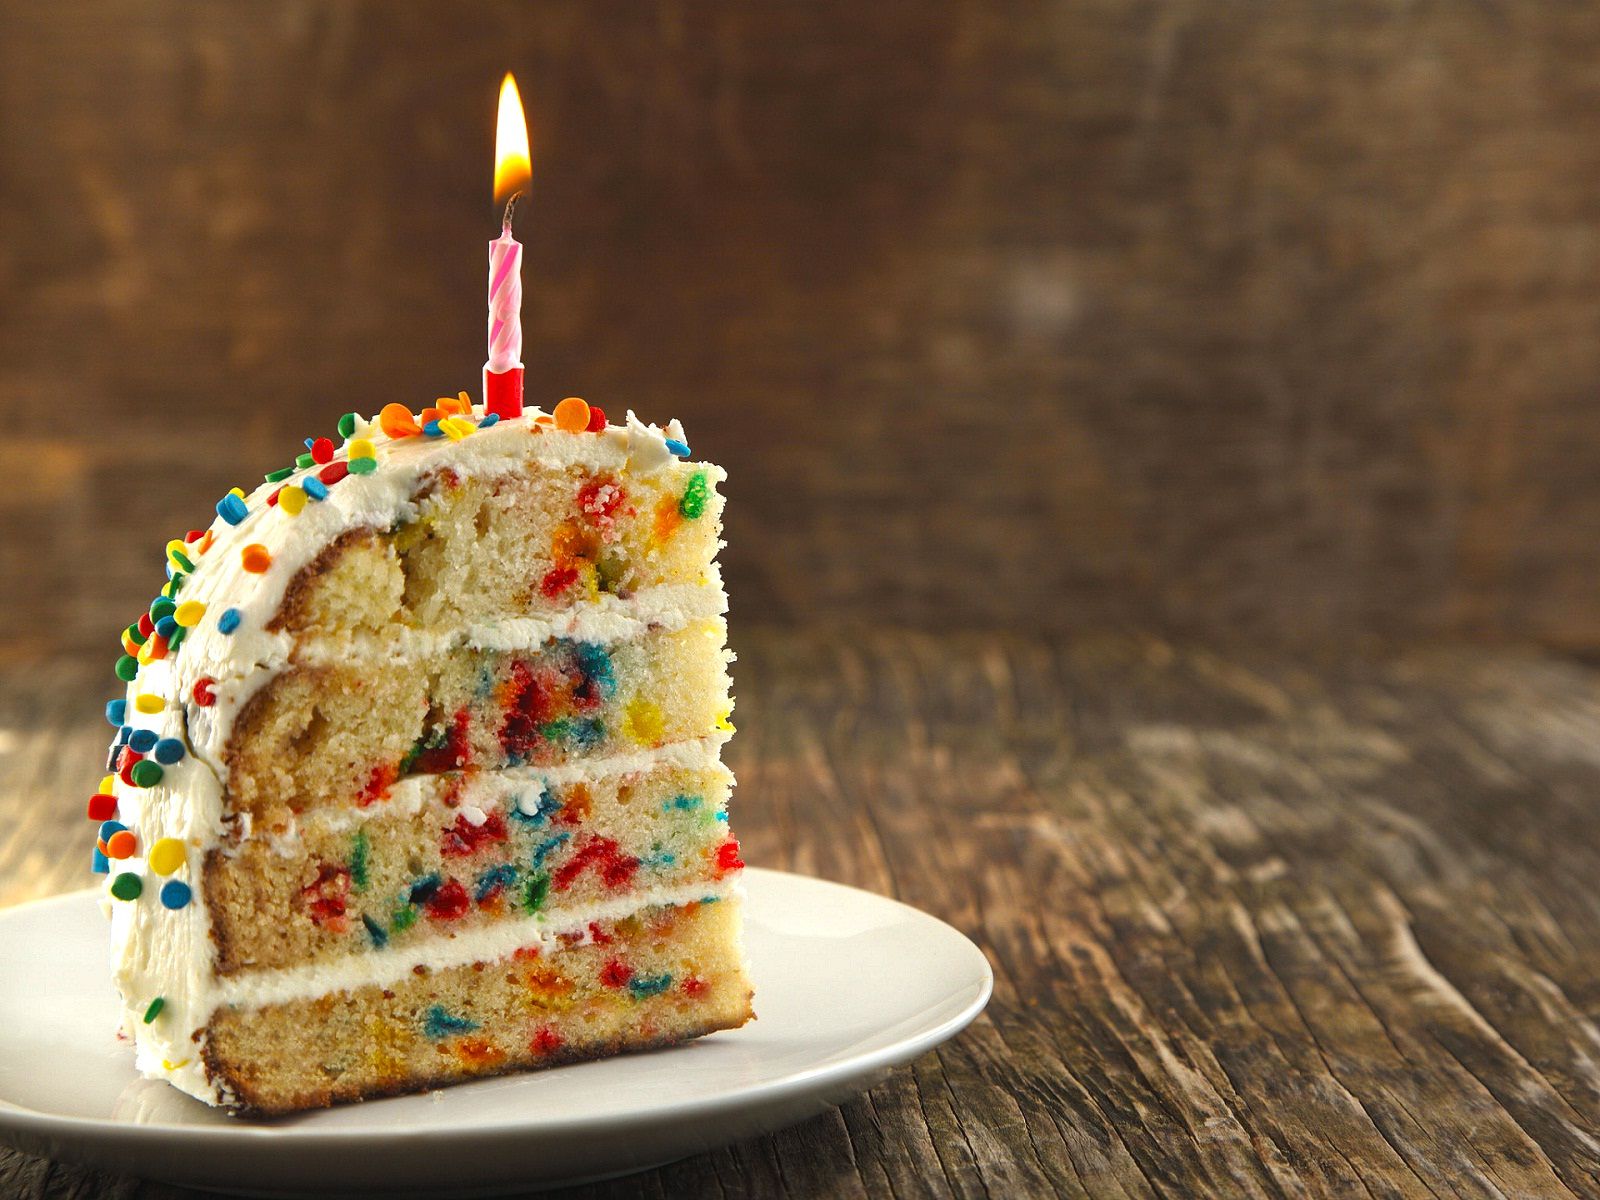 Happy Birthday Cake Hd Wallpaper Resilience Post